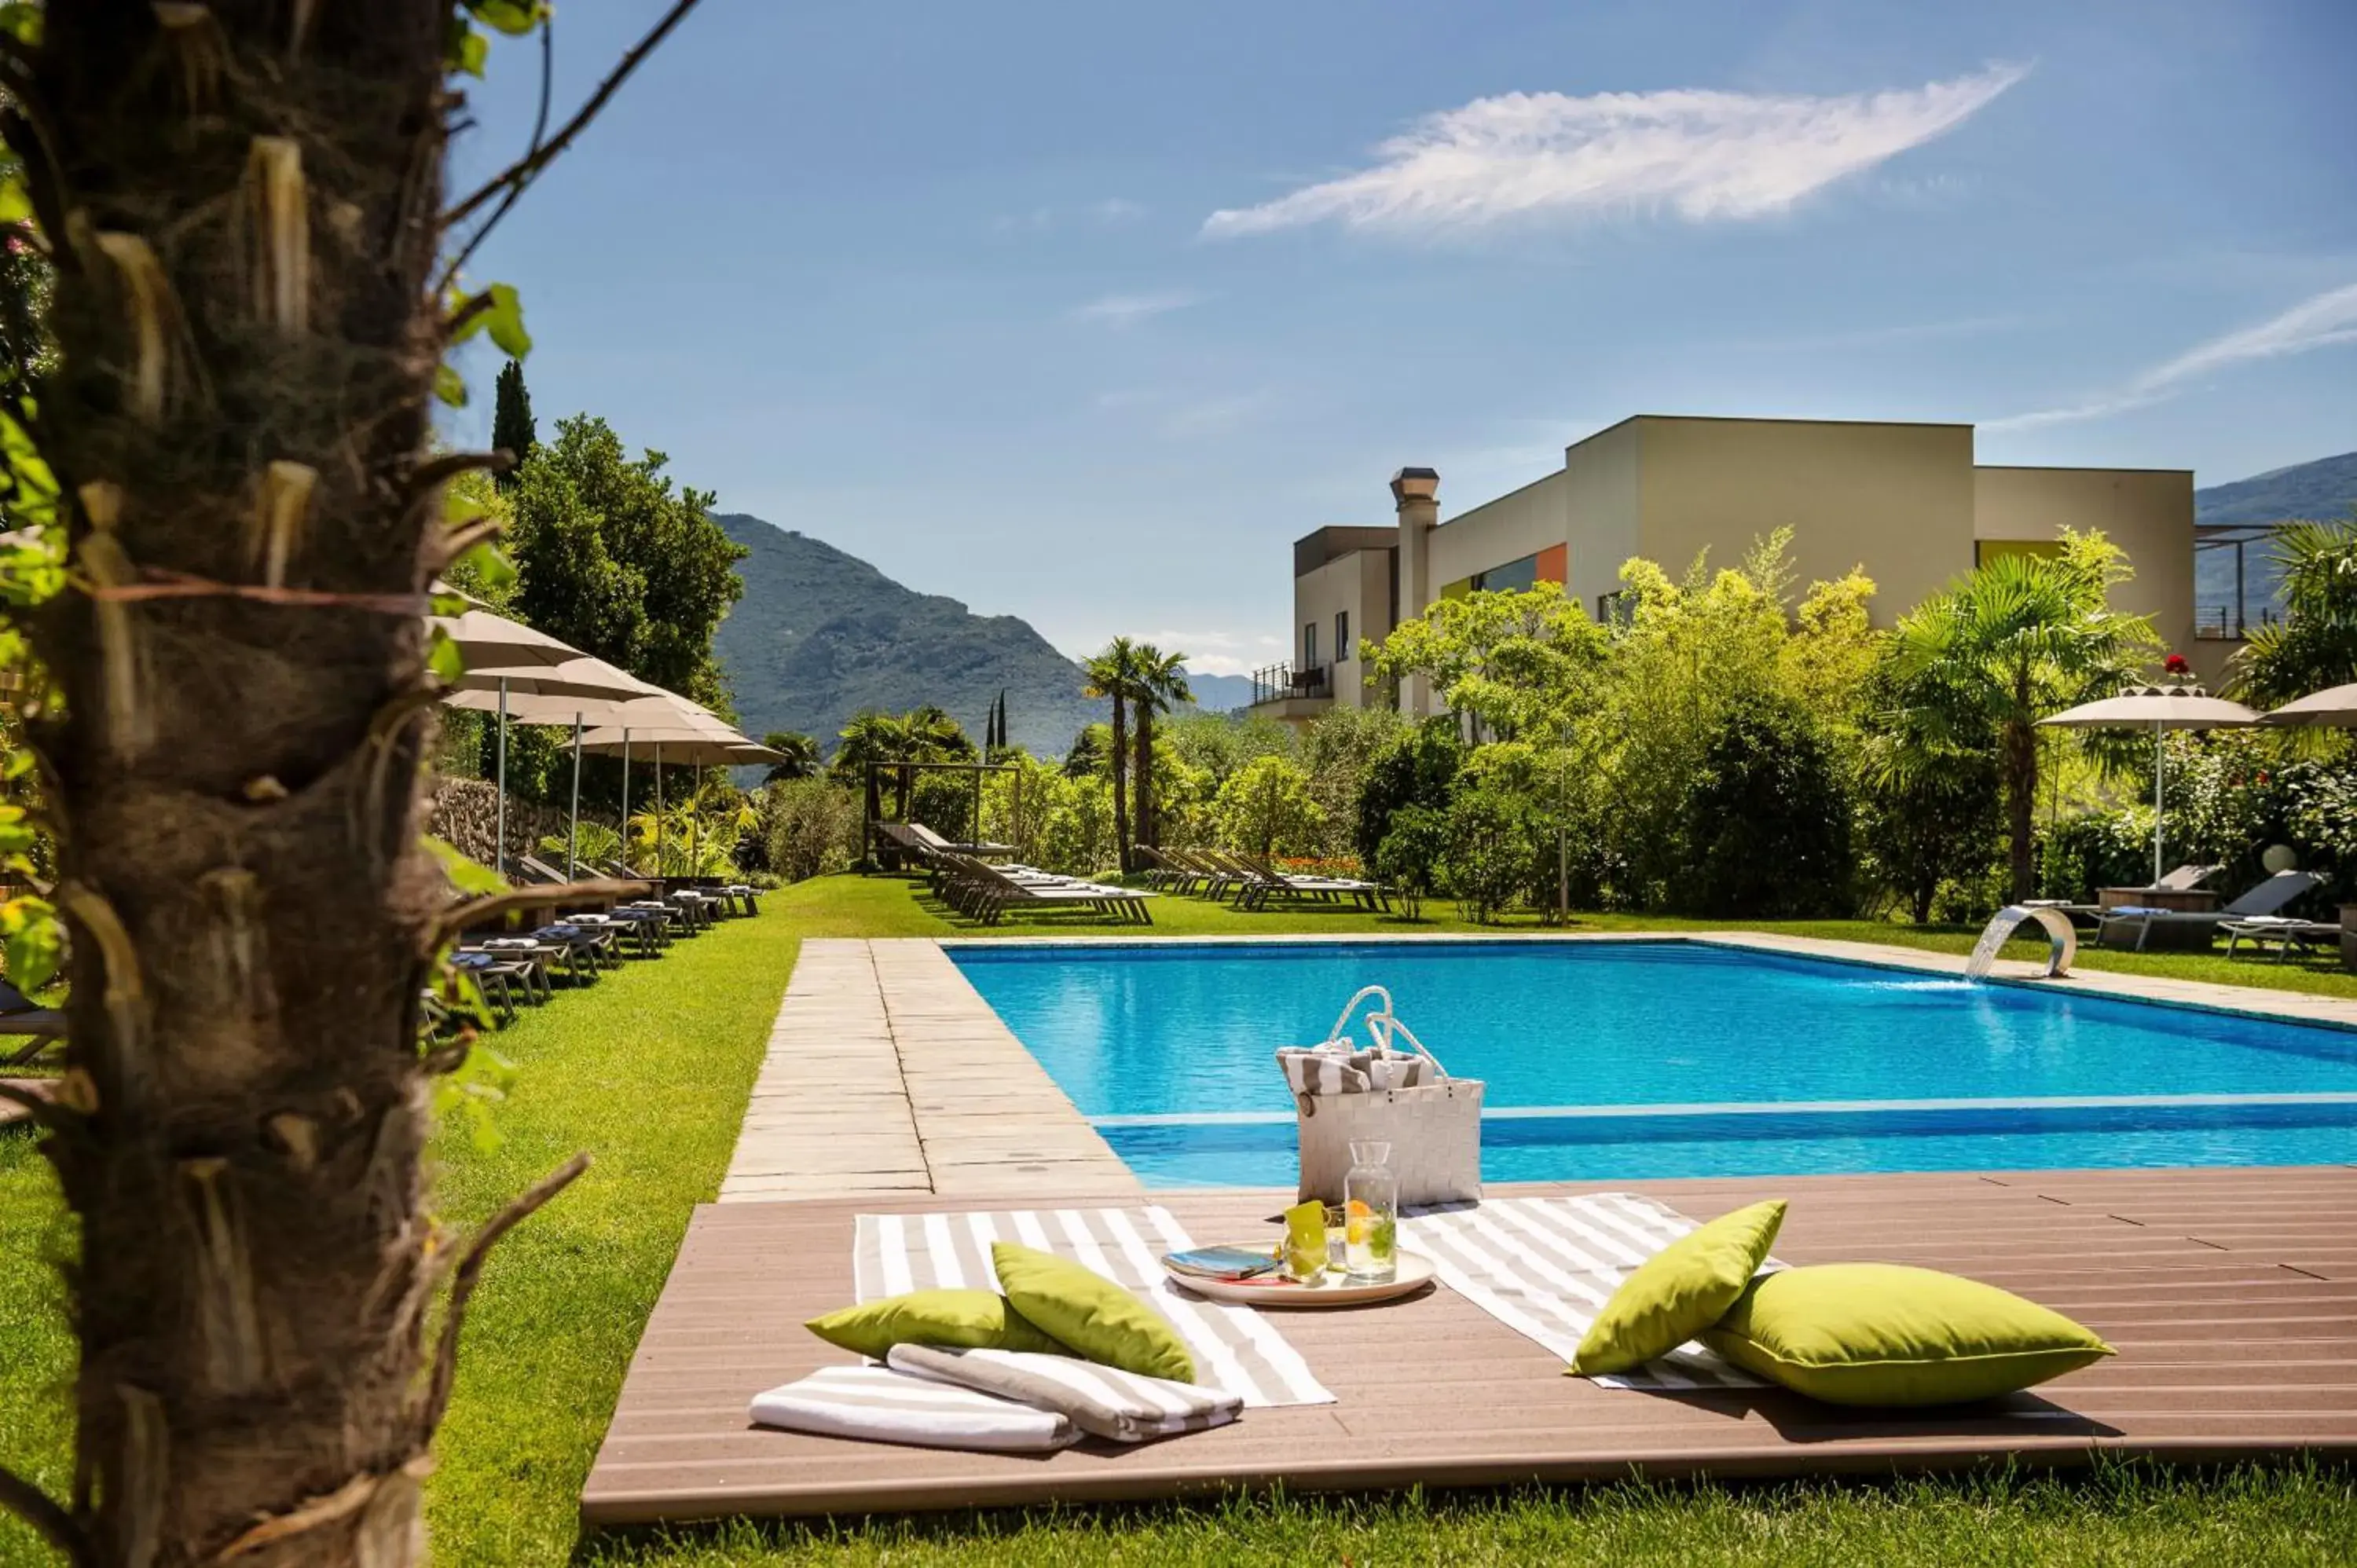 Garden, Swimming Pool in Active & Family Hotel Gioiosa